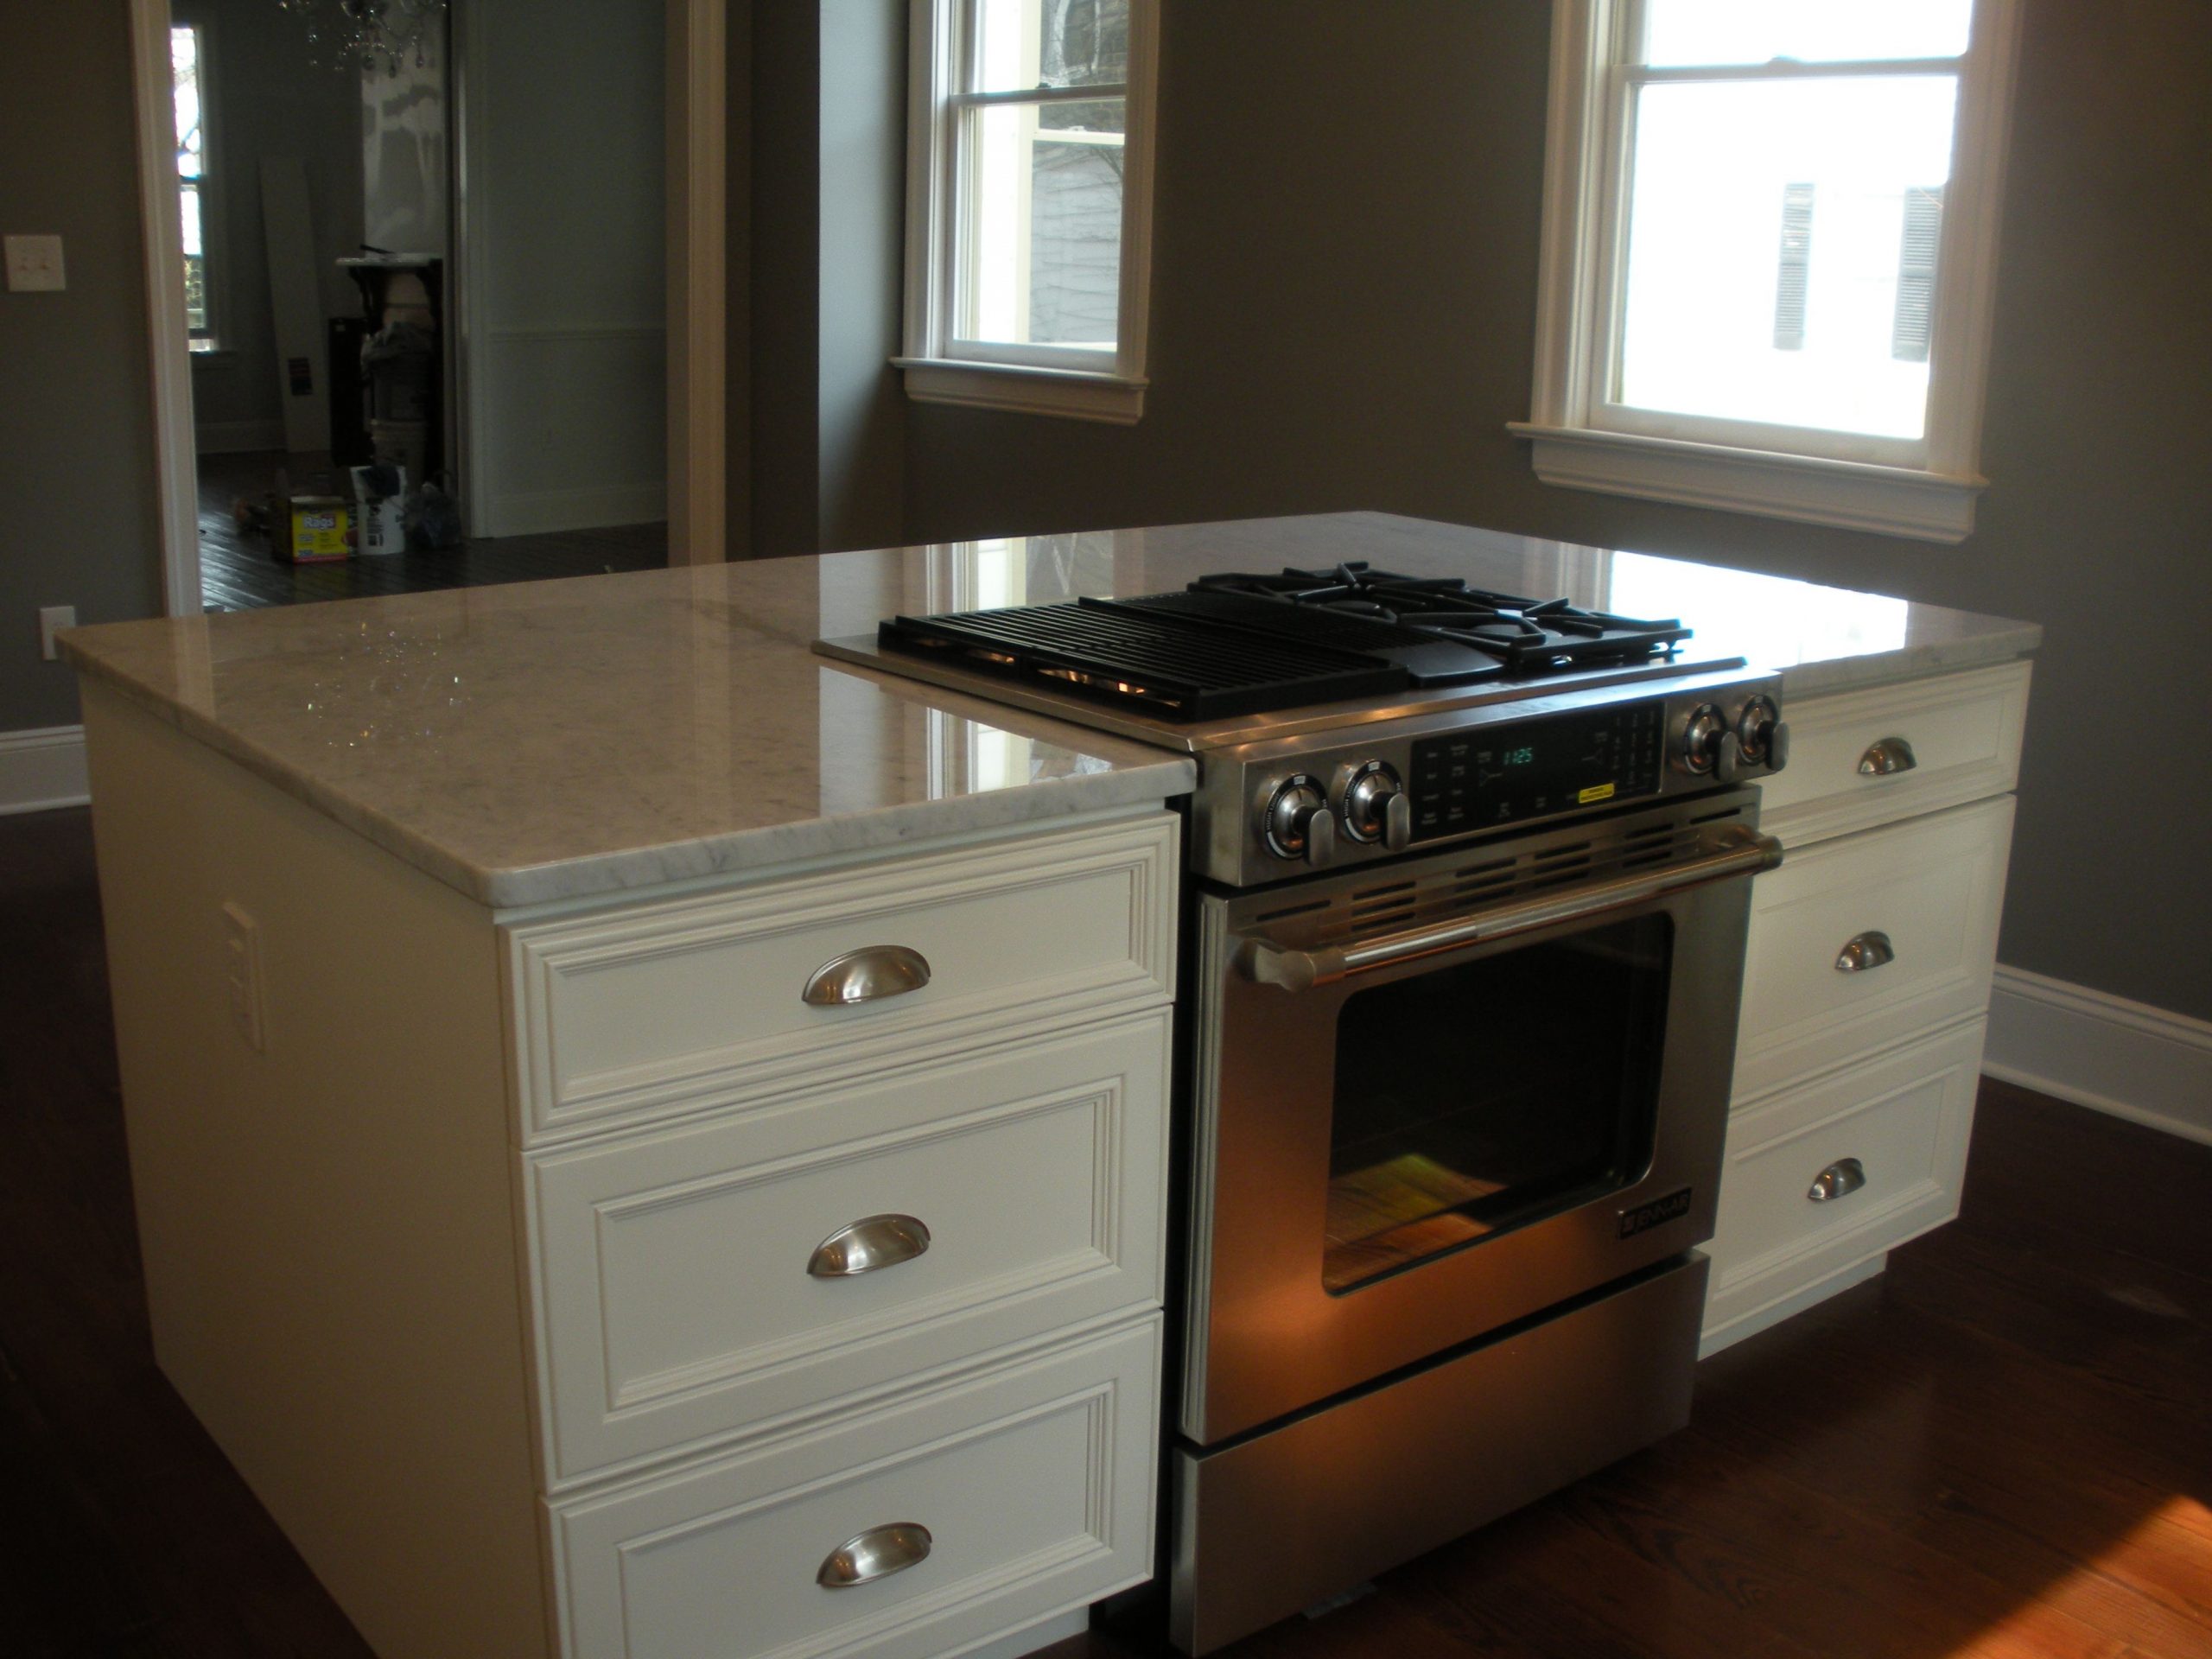 countertop stove island
 downdraft drop in stove in island | Kitchen remodel small ..